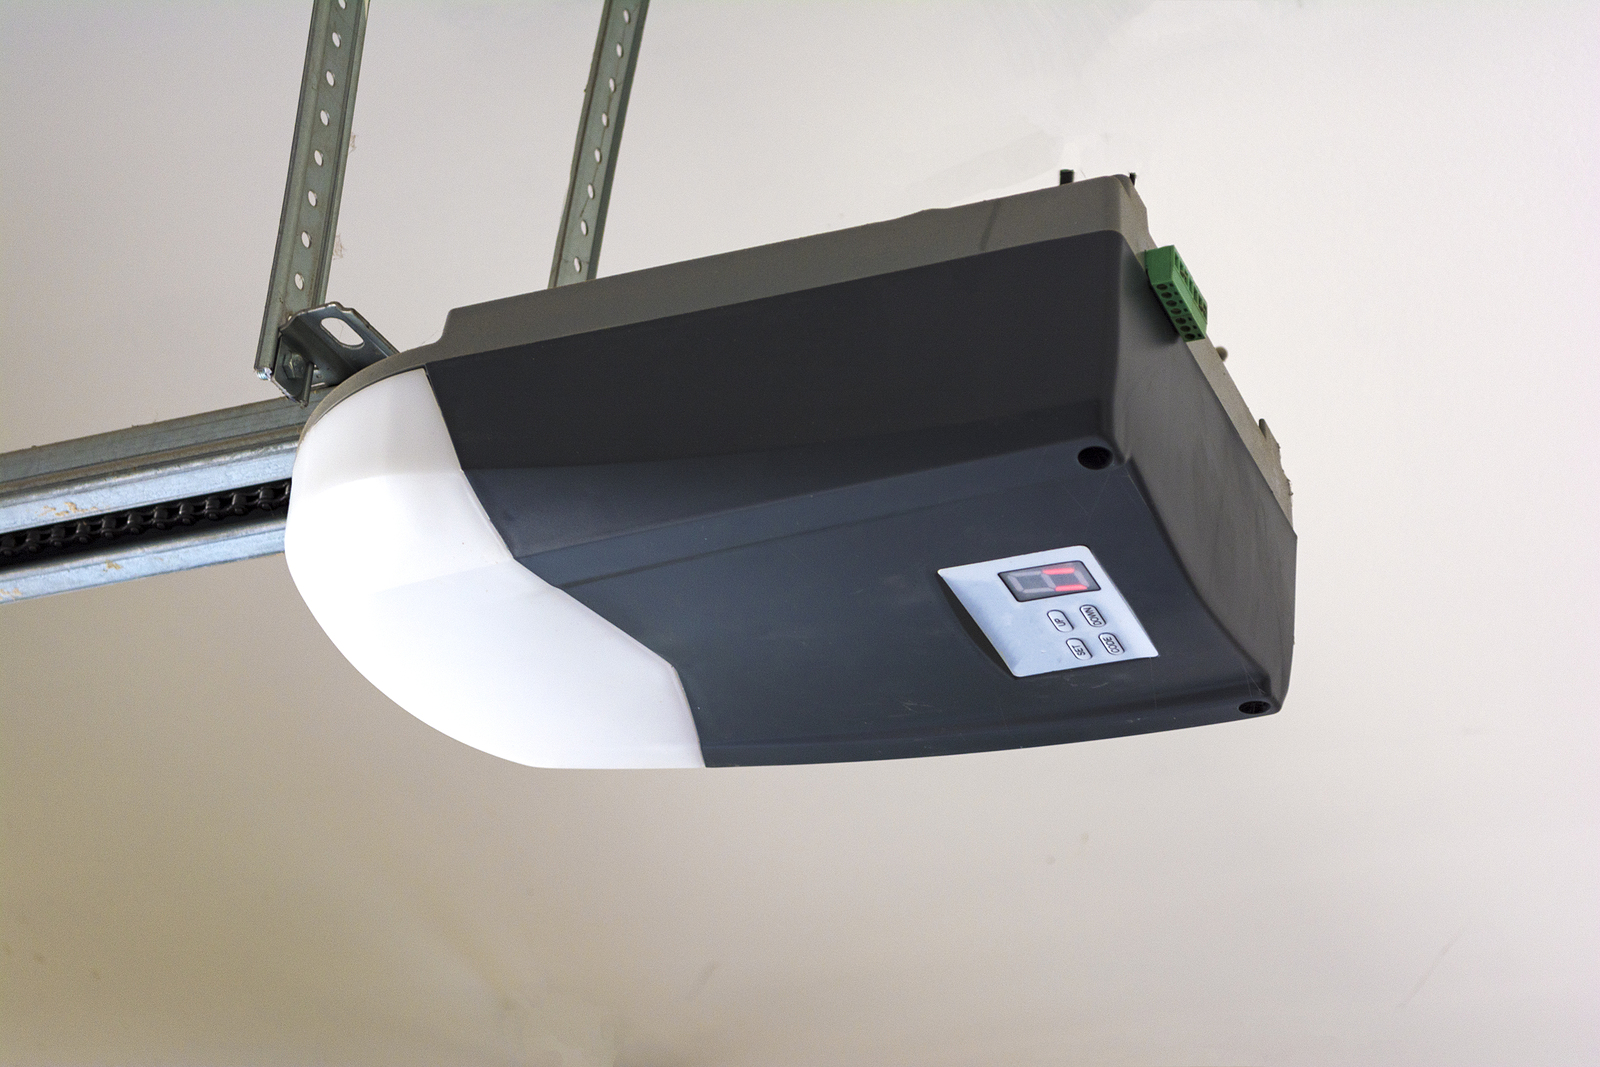 Close-Up-Of-An-Automatic-Garage-Door-Opener-on-Ceiling